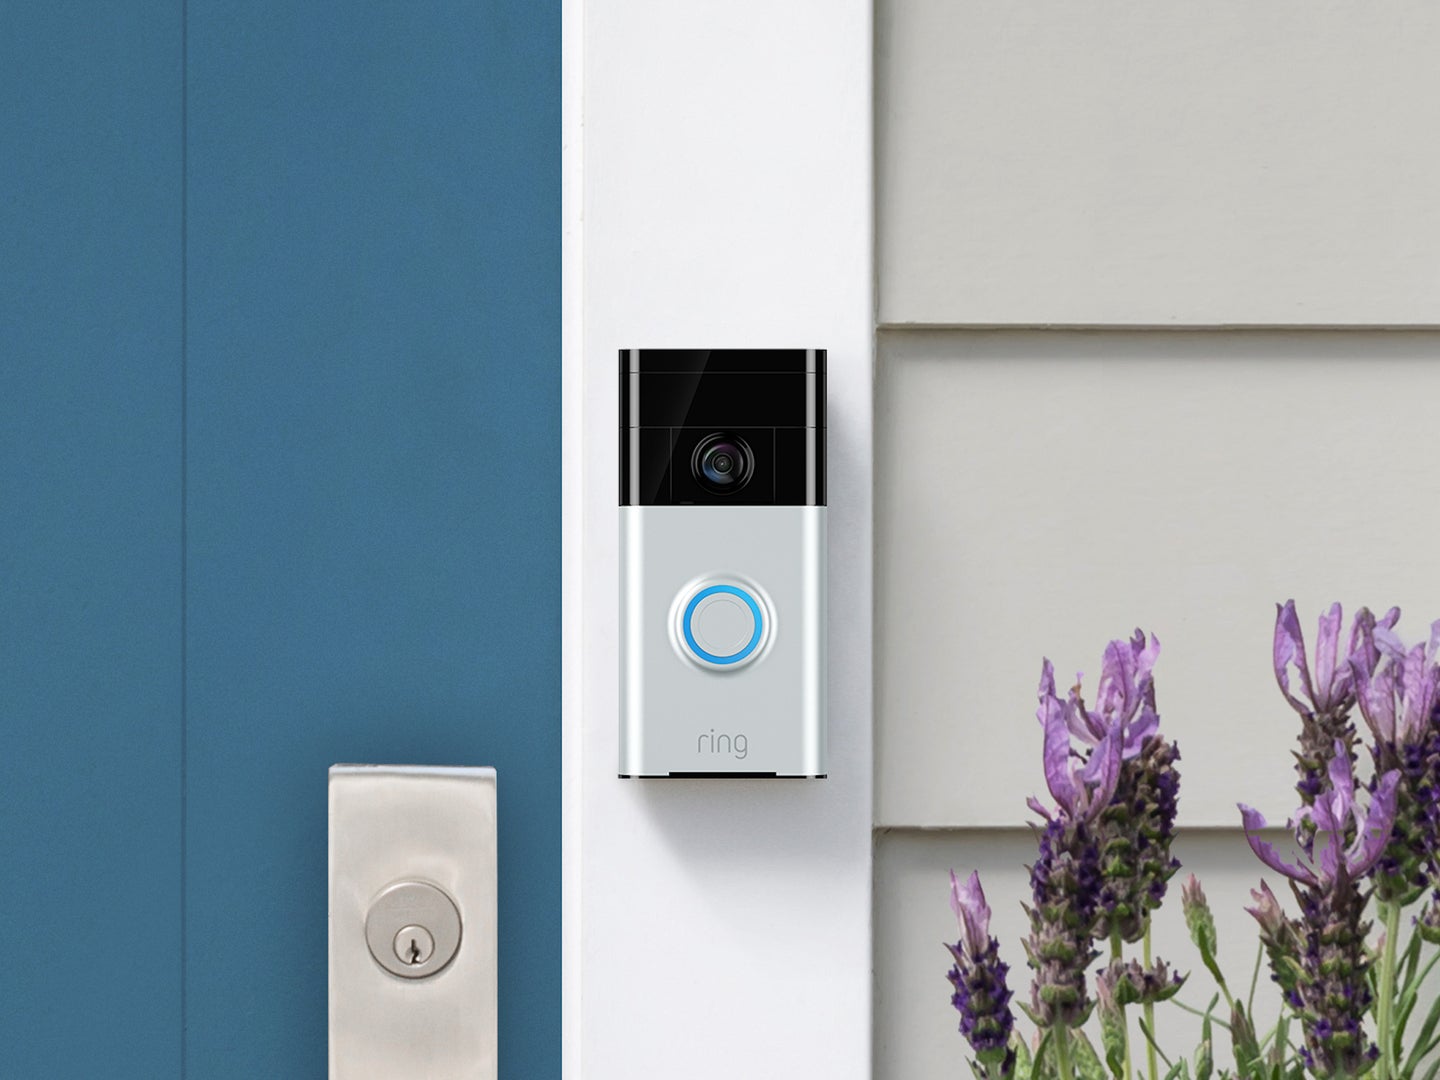 Ring Video Doorbell attached to door frame of house